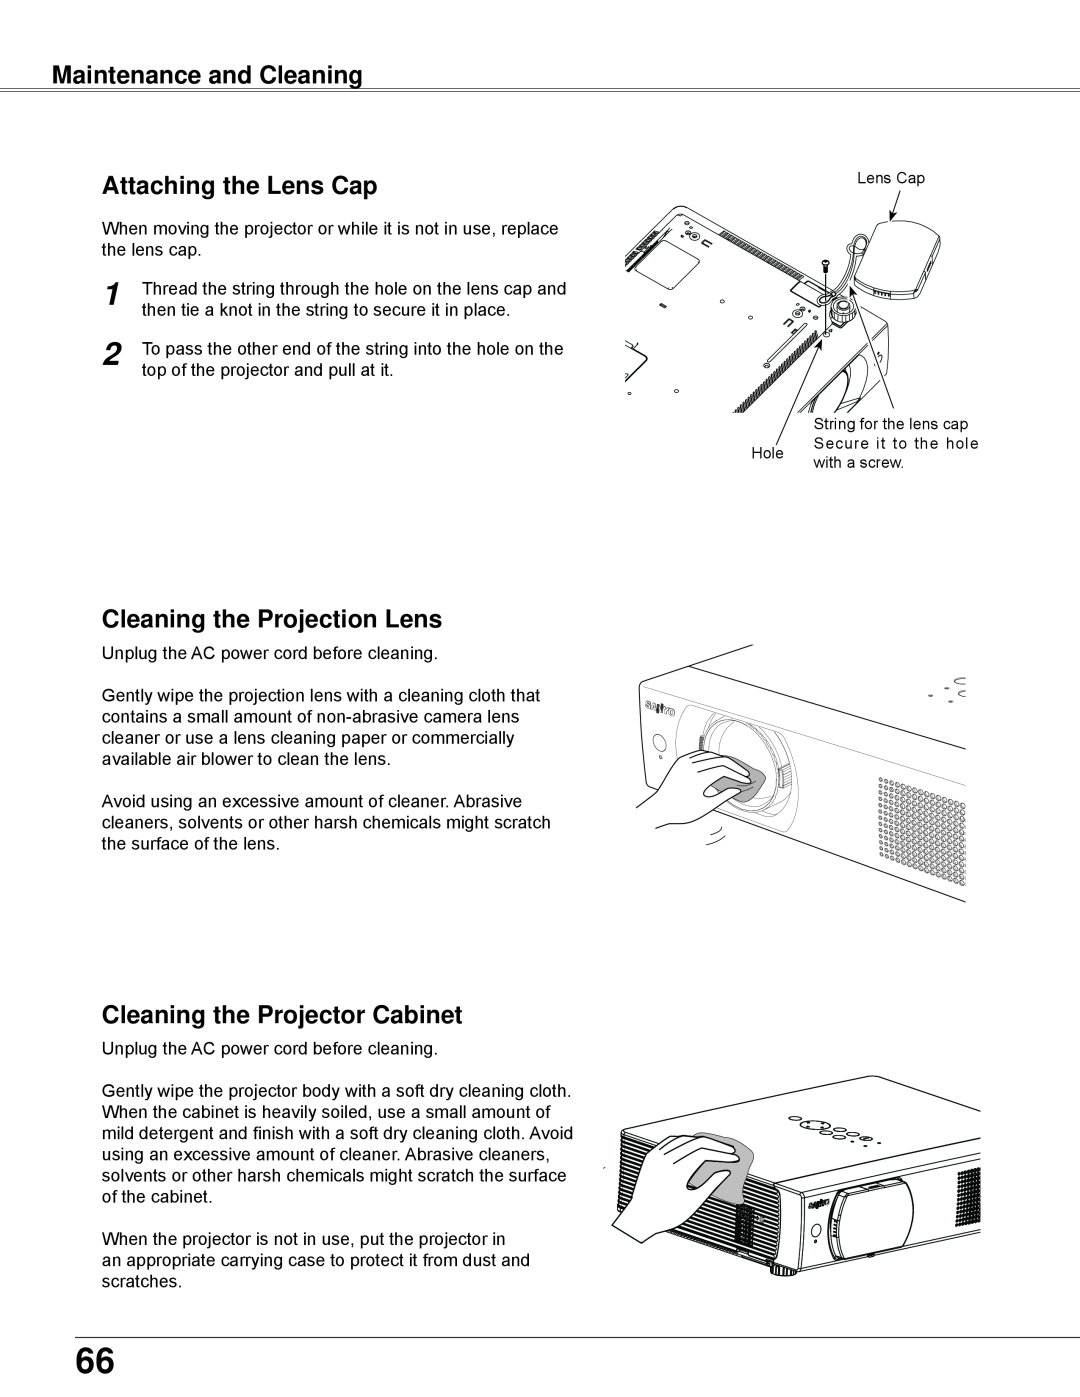 Sanyo PLC-WXU700 owner manual Maintenance and Cleaning Attaching the Lens Cap, Cleaning the Projection Lens, with a screw 